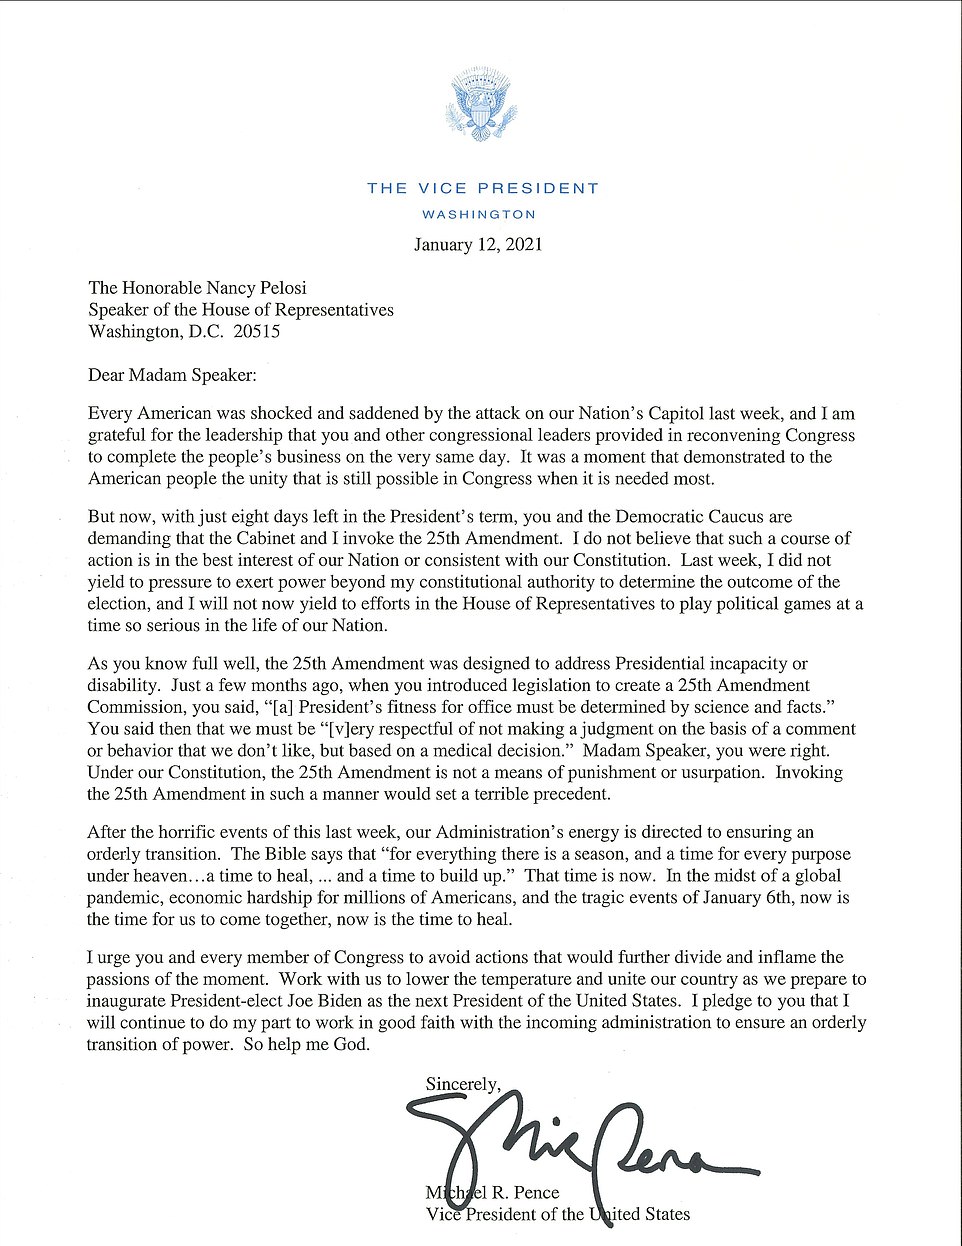 Vice President Mike Pence released the letter he had sent to House Speaker Nancy Pelosi as the House was taking its first vote on the resolution that pressures him to invoke the 25th Amendment